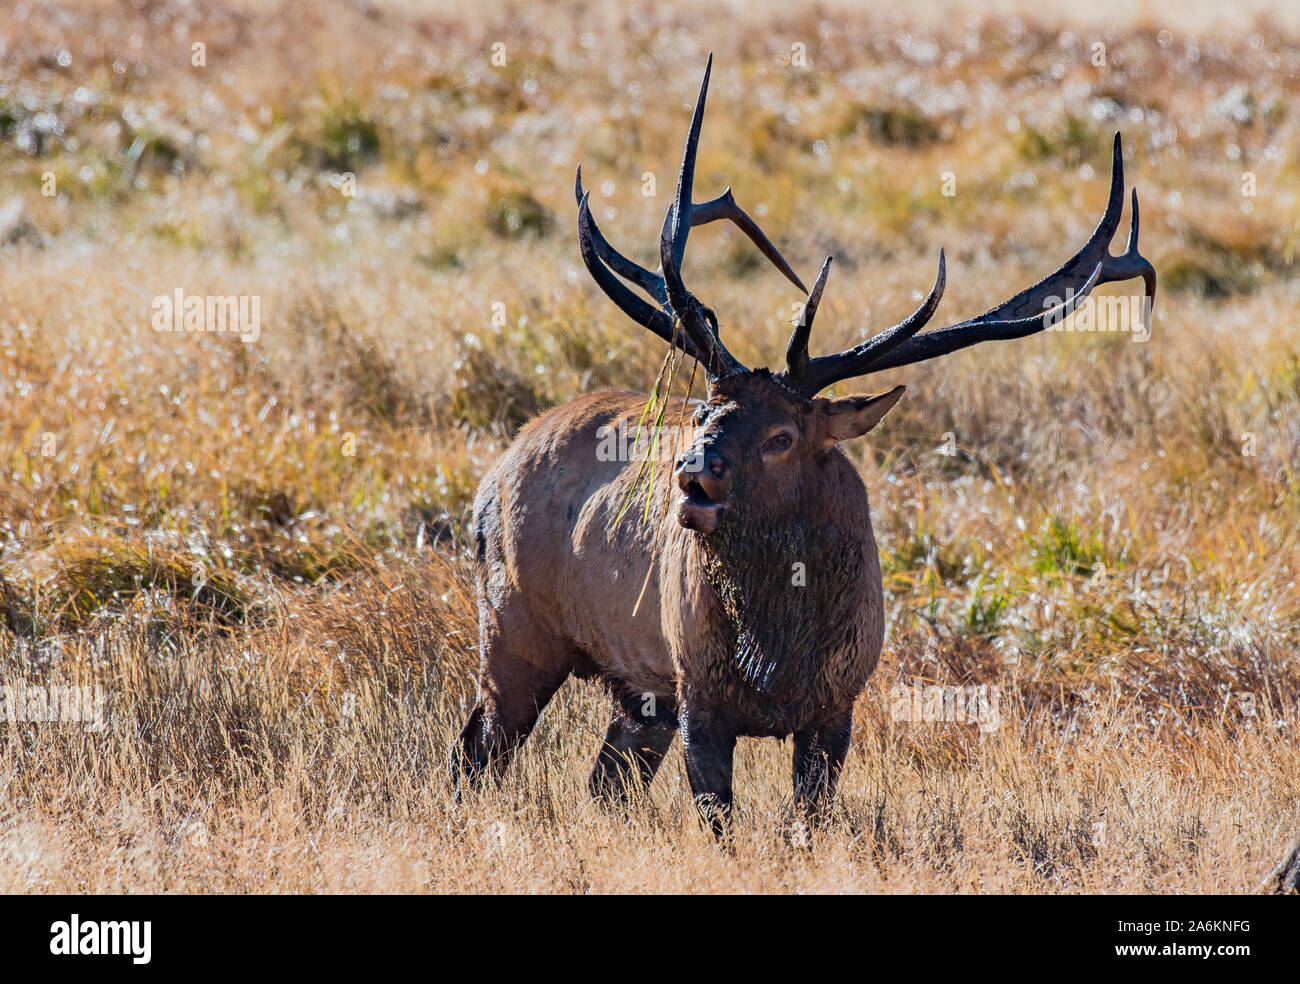 A Large Bull Elk in the Colorado Mountains Stock Photo